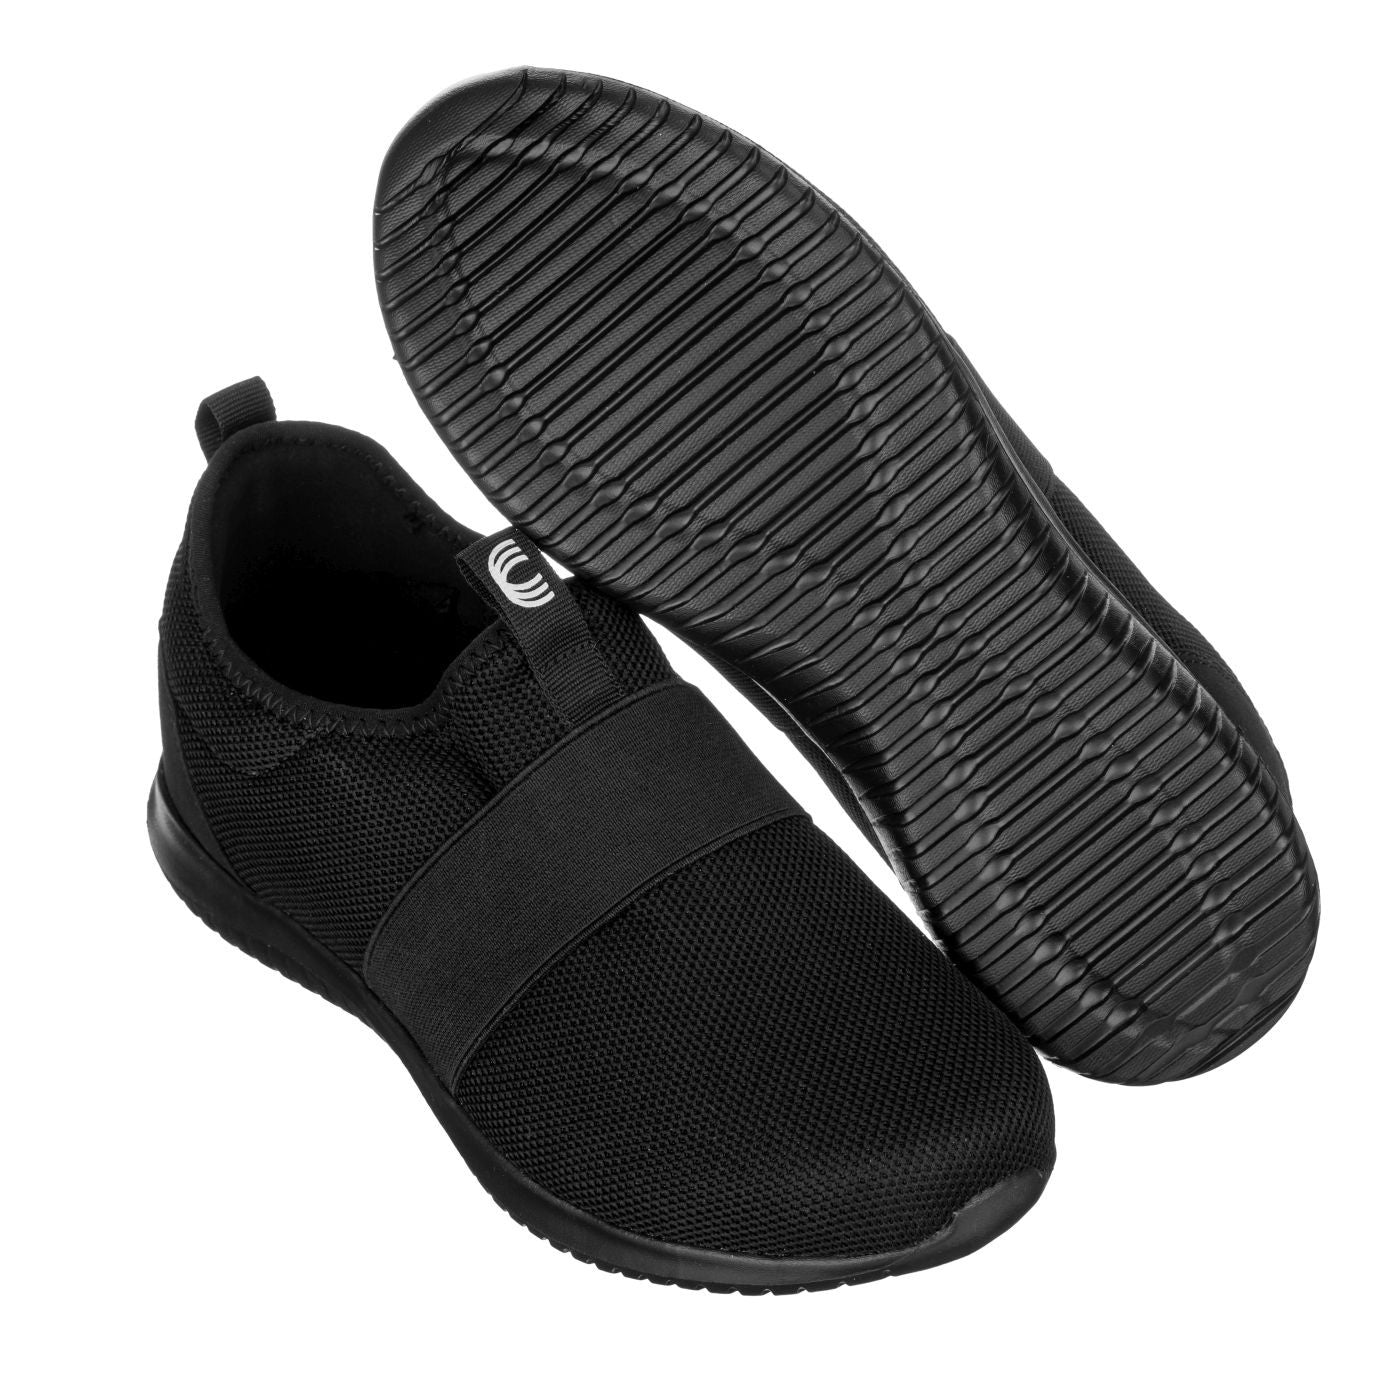 Elevator shoes height increase CALTO - Q120 - 2.1 Inches Taller (Black) - Ultra Feather Lightweight